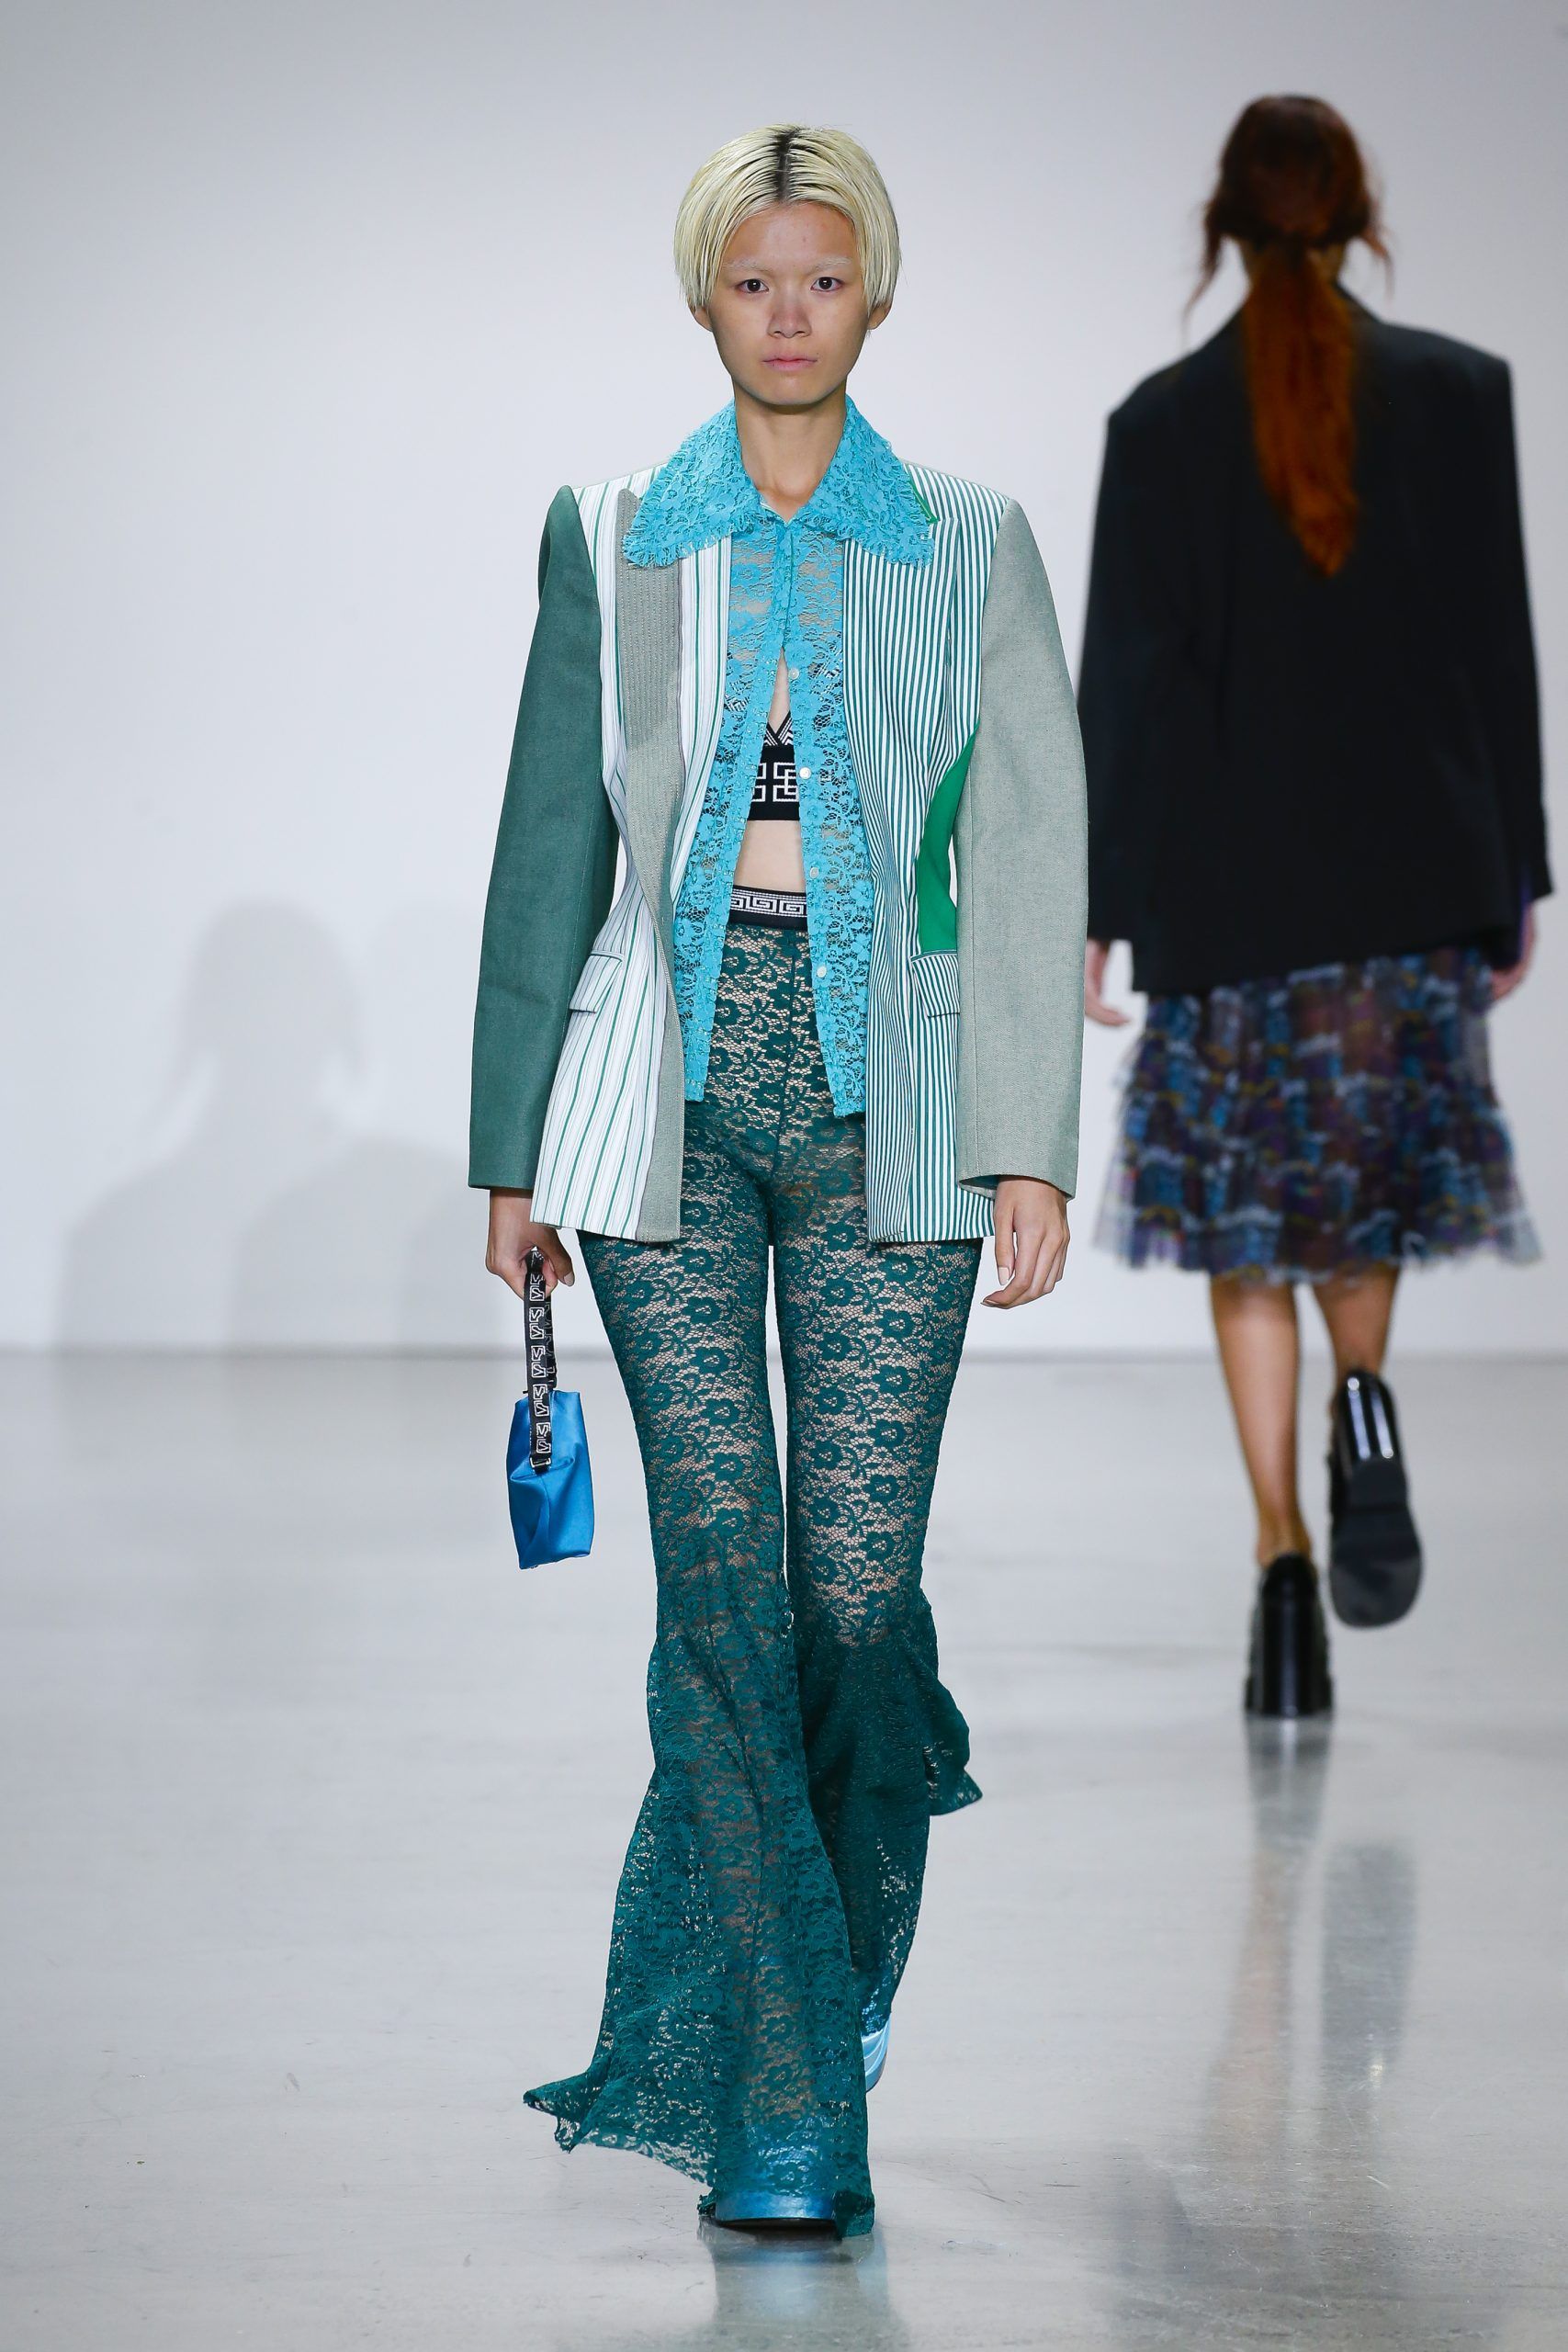 Female model with blue and green outfit at Metaverse, Past, Present, and Future SS23 show at New York Fashion Week 